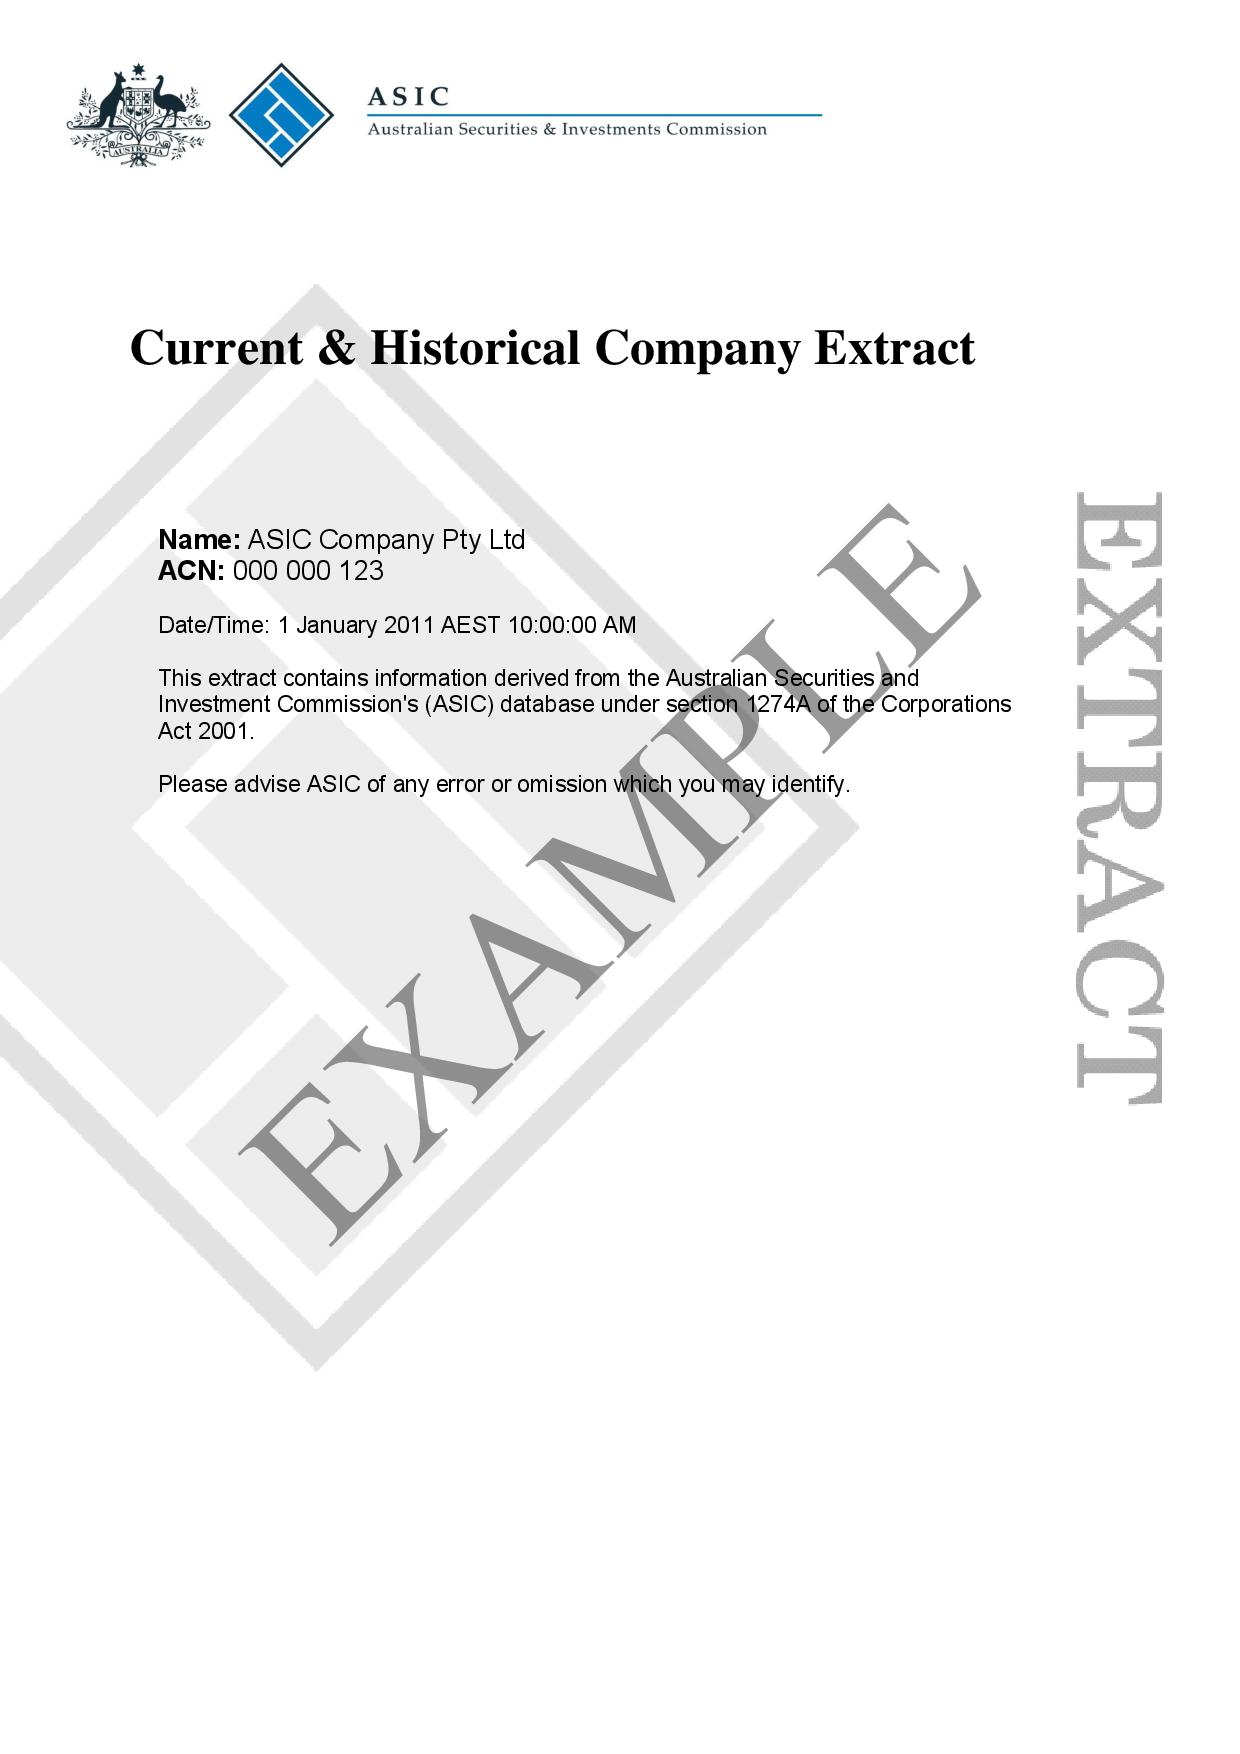 ASIC Historical Company Extract